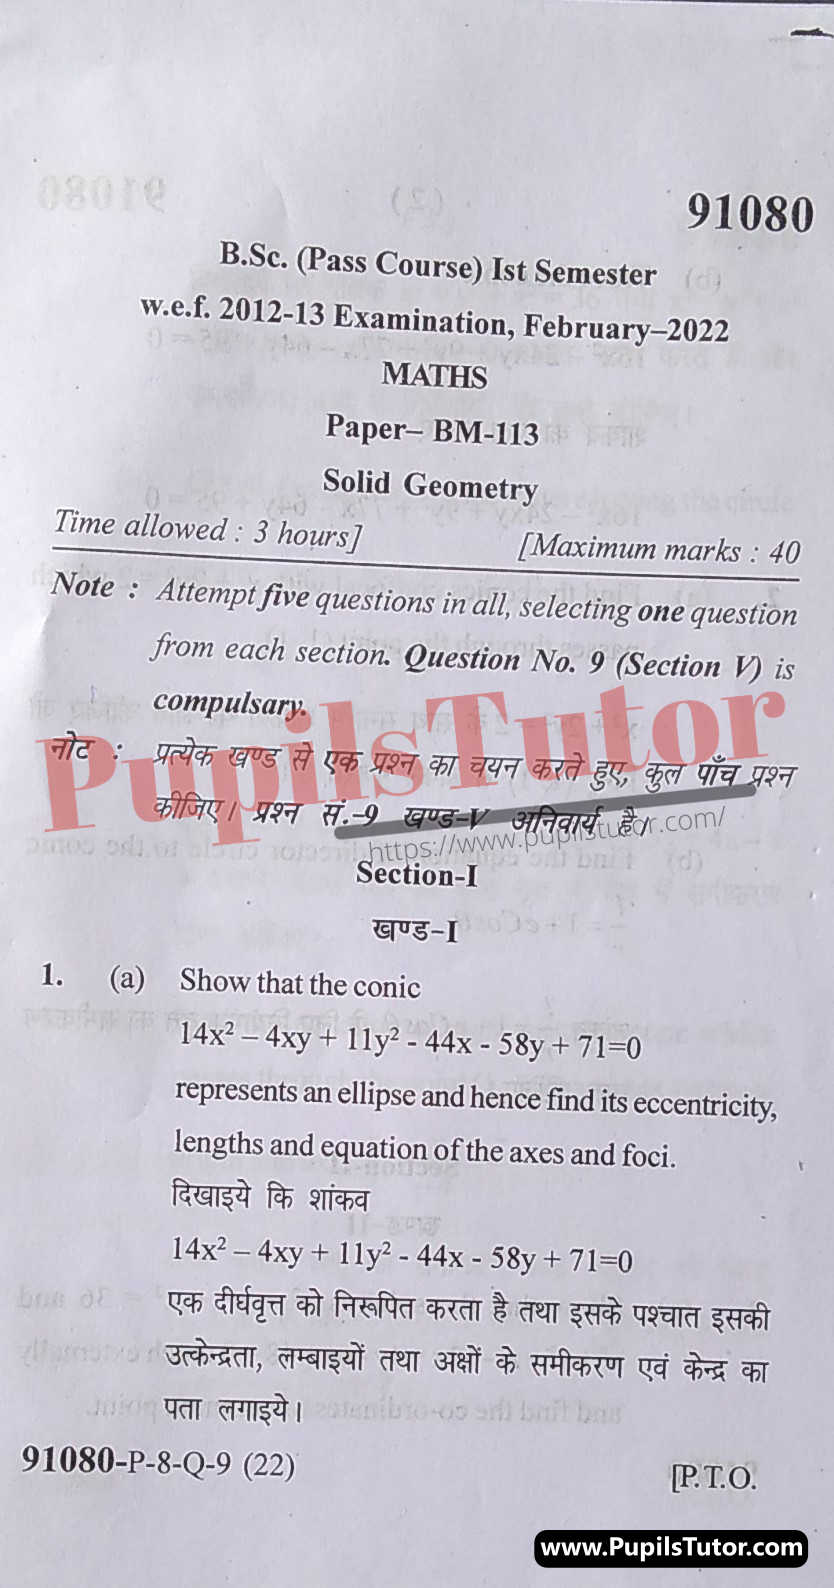 MDU (Maharshi Dayanand University, Rohtak Haryana) BSc Maths Pass Course First Semester Previous Year Solid Geometry Question Paper For February, 2022 Exam (Question Paper Page 1) - pupilstutor.com